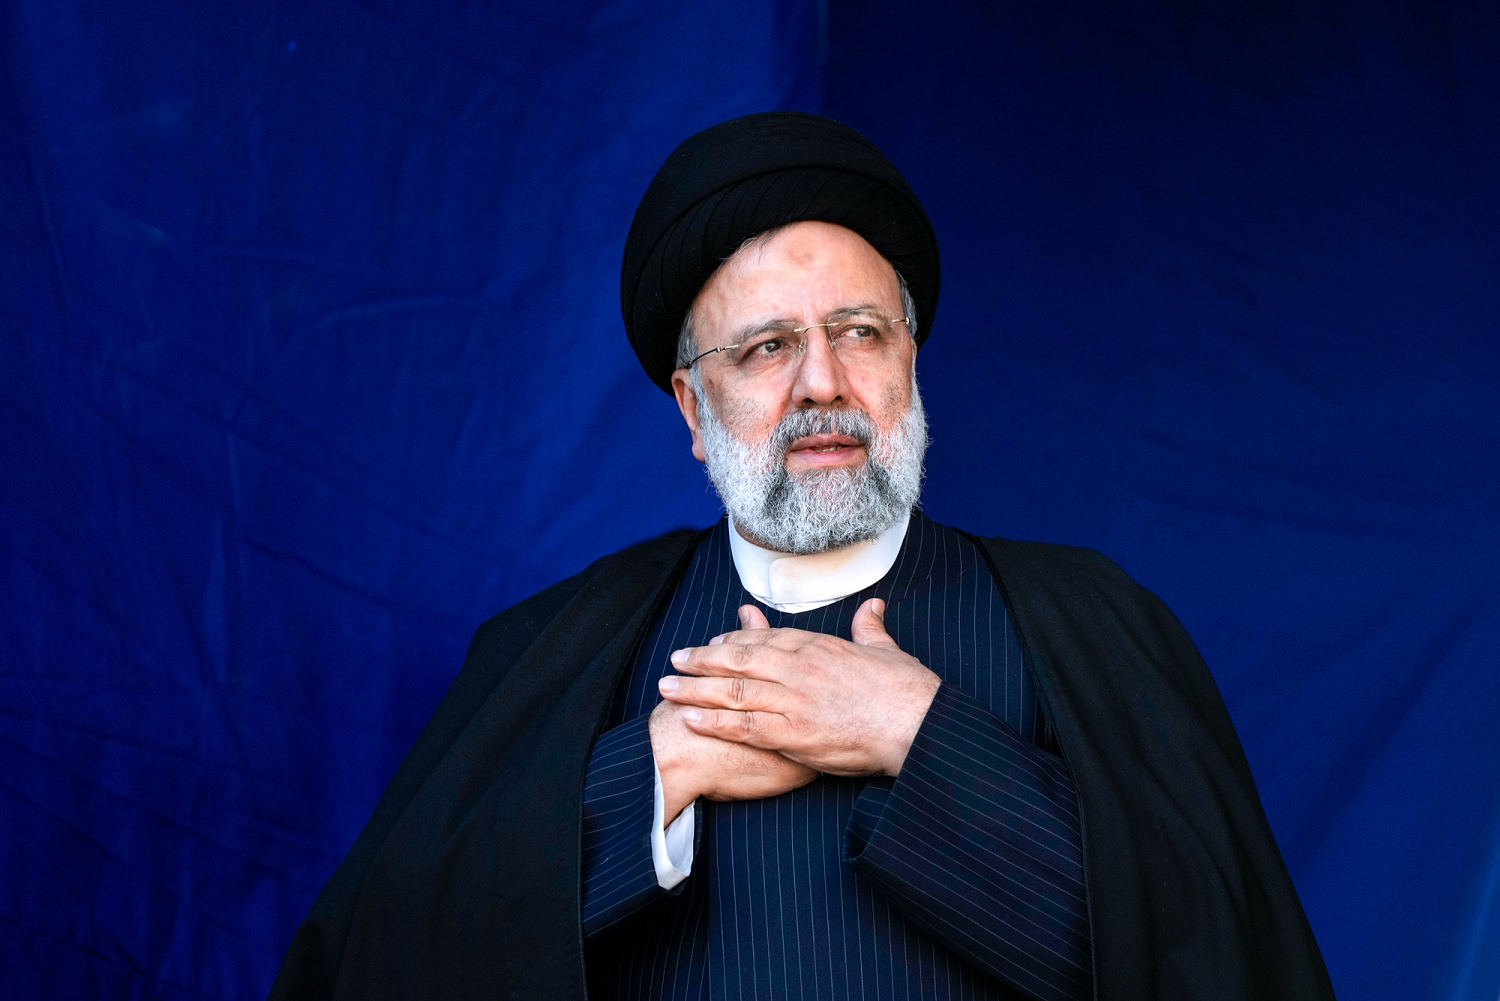 Iran’s president Ebrahim Raisi killed in helicopter crash; no foul play suspected